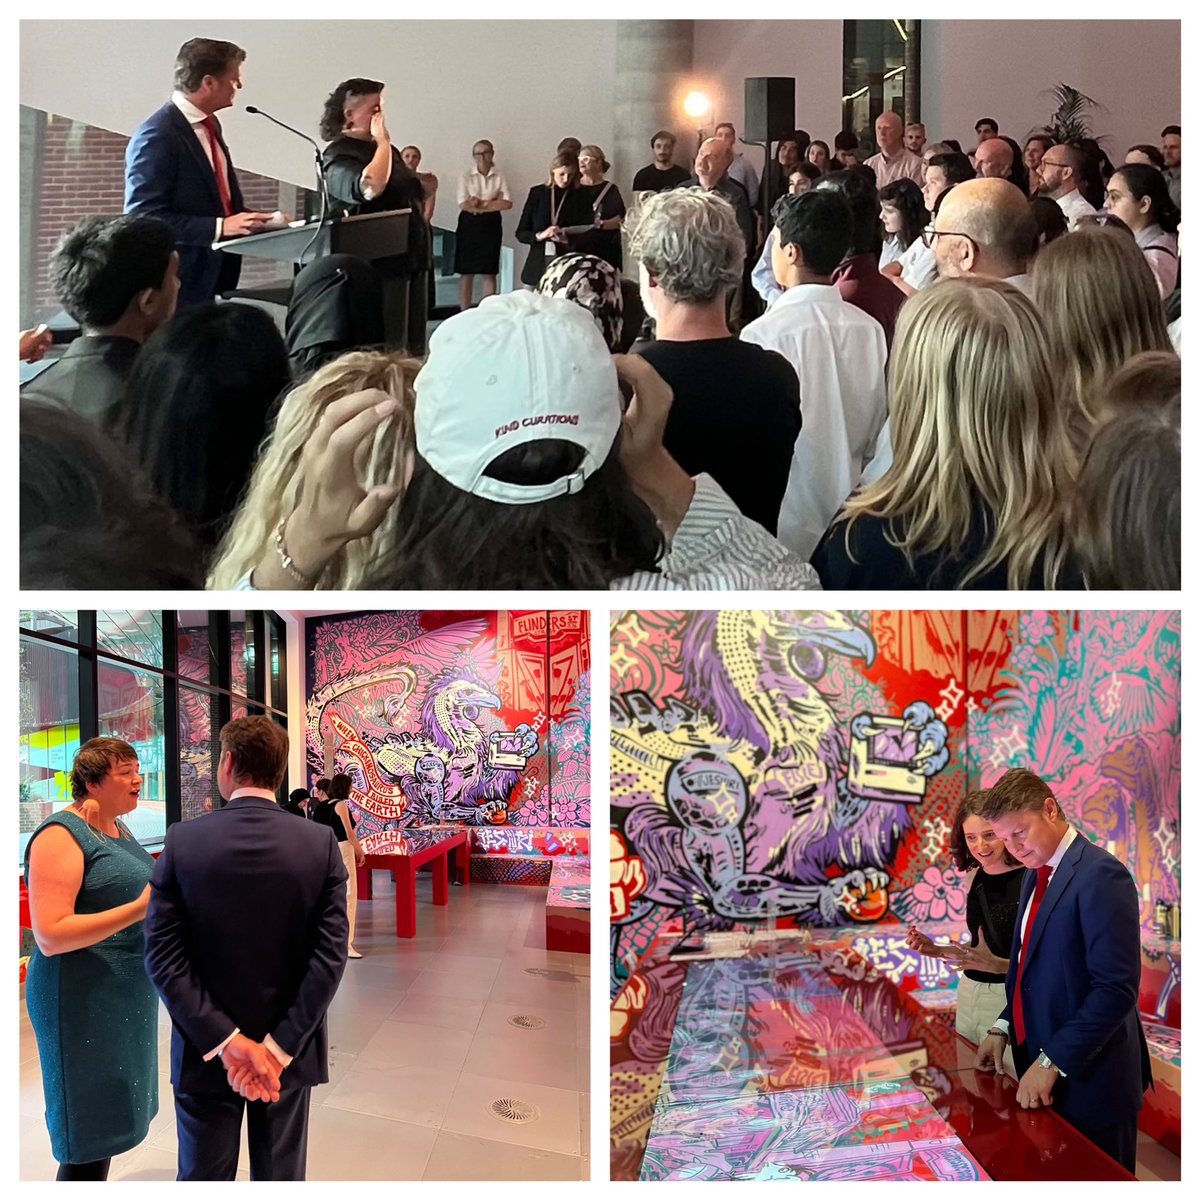 Bumper crowd for launch of @scigallerymel #NotNatural exhibition blending #art #science to explore the way #technology & #humanintervention is reshaping our world. Congrats to all involved - great example of what can be achieved when #artists #researchers #curators come together.